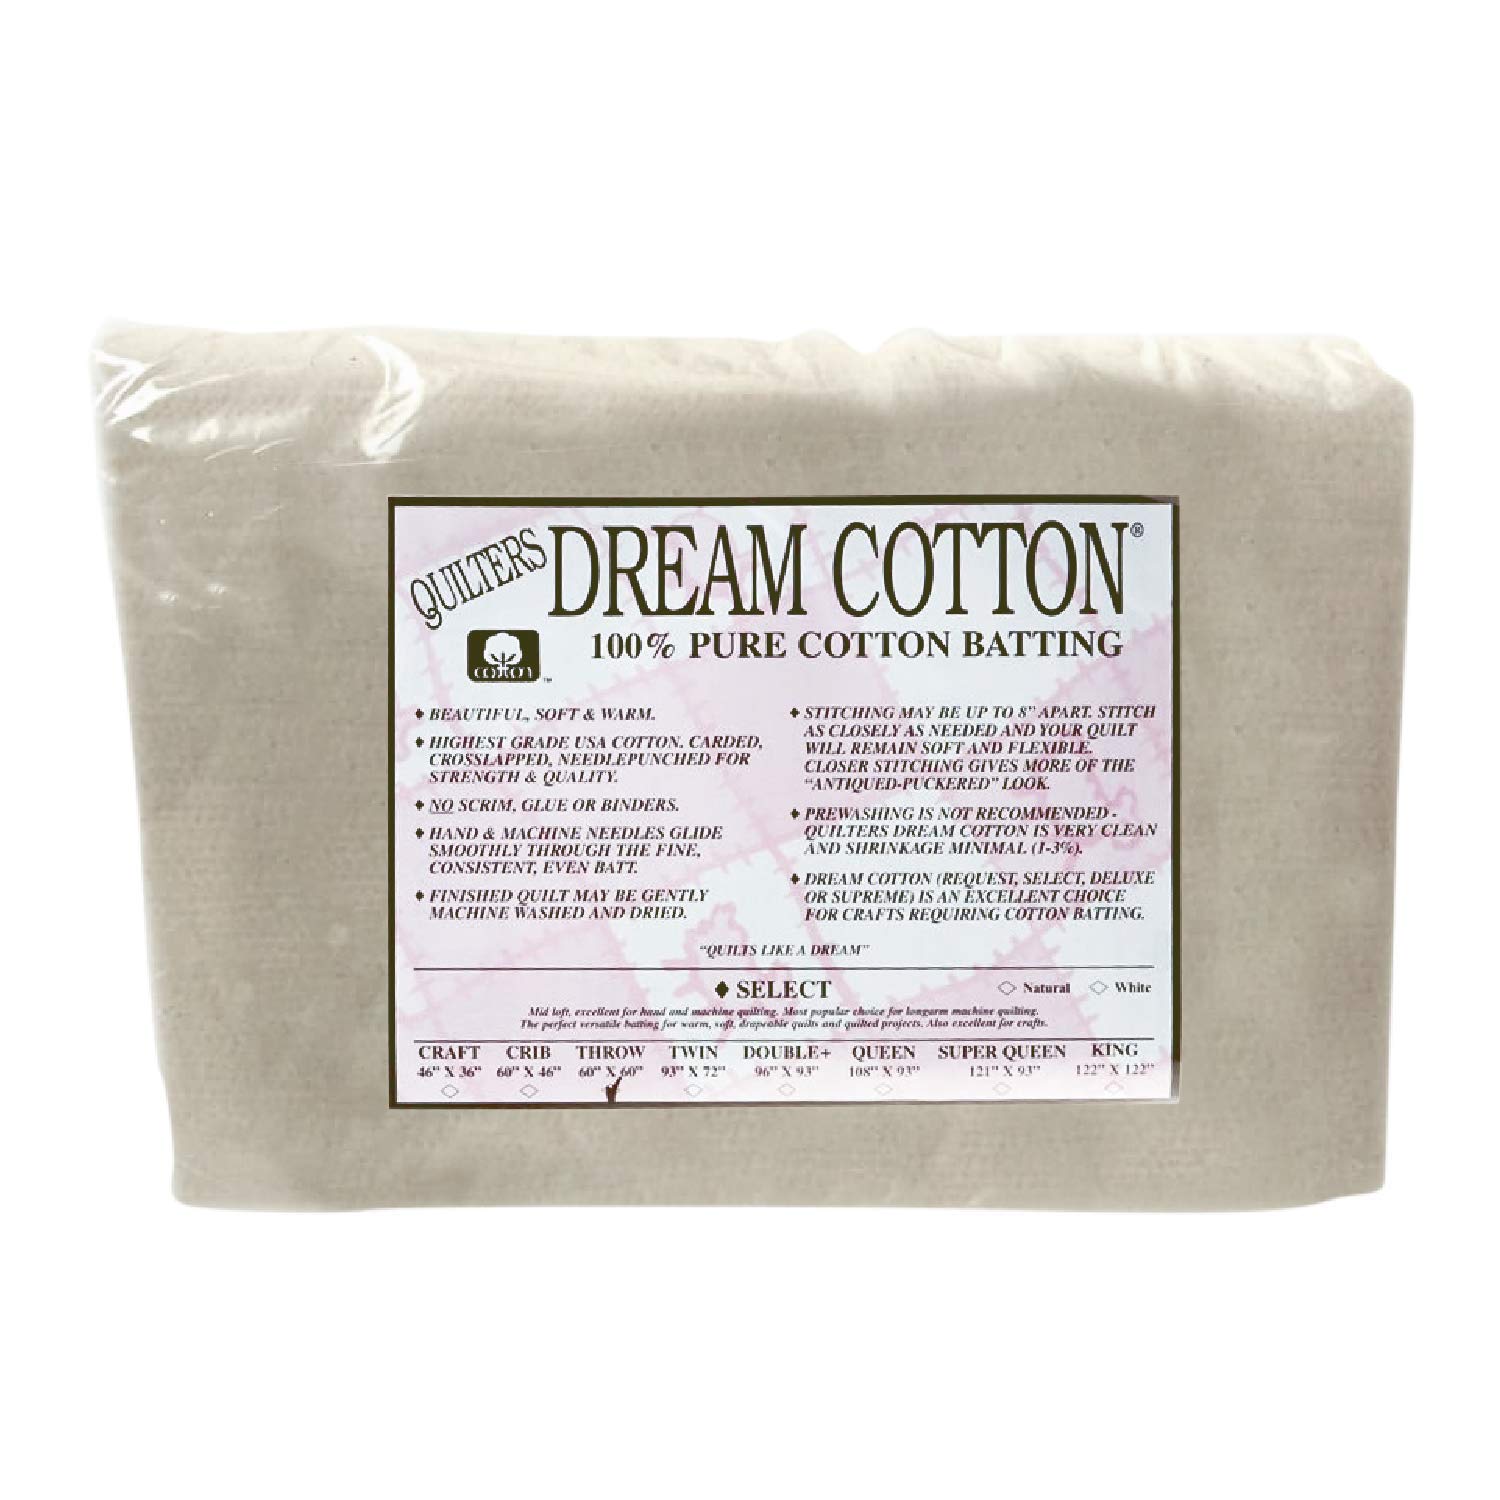 *QUILTERS DREAM COTTON BATTING - WHITE *SELECT*